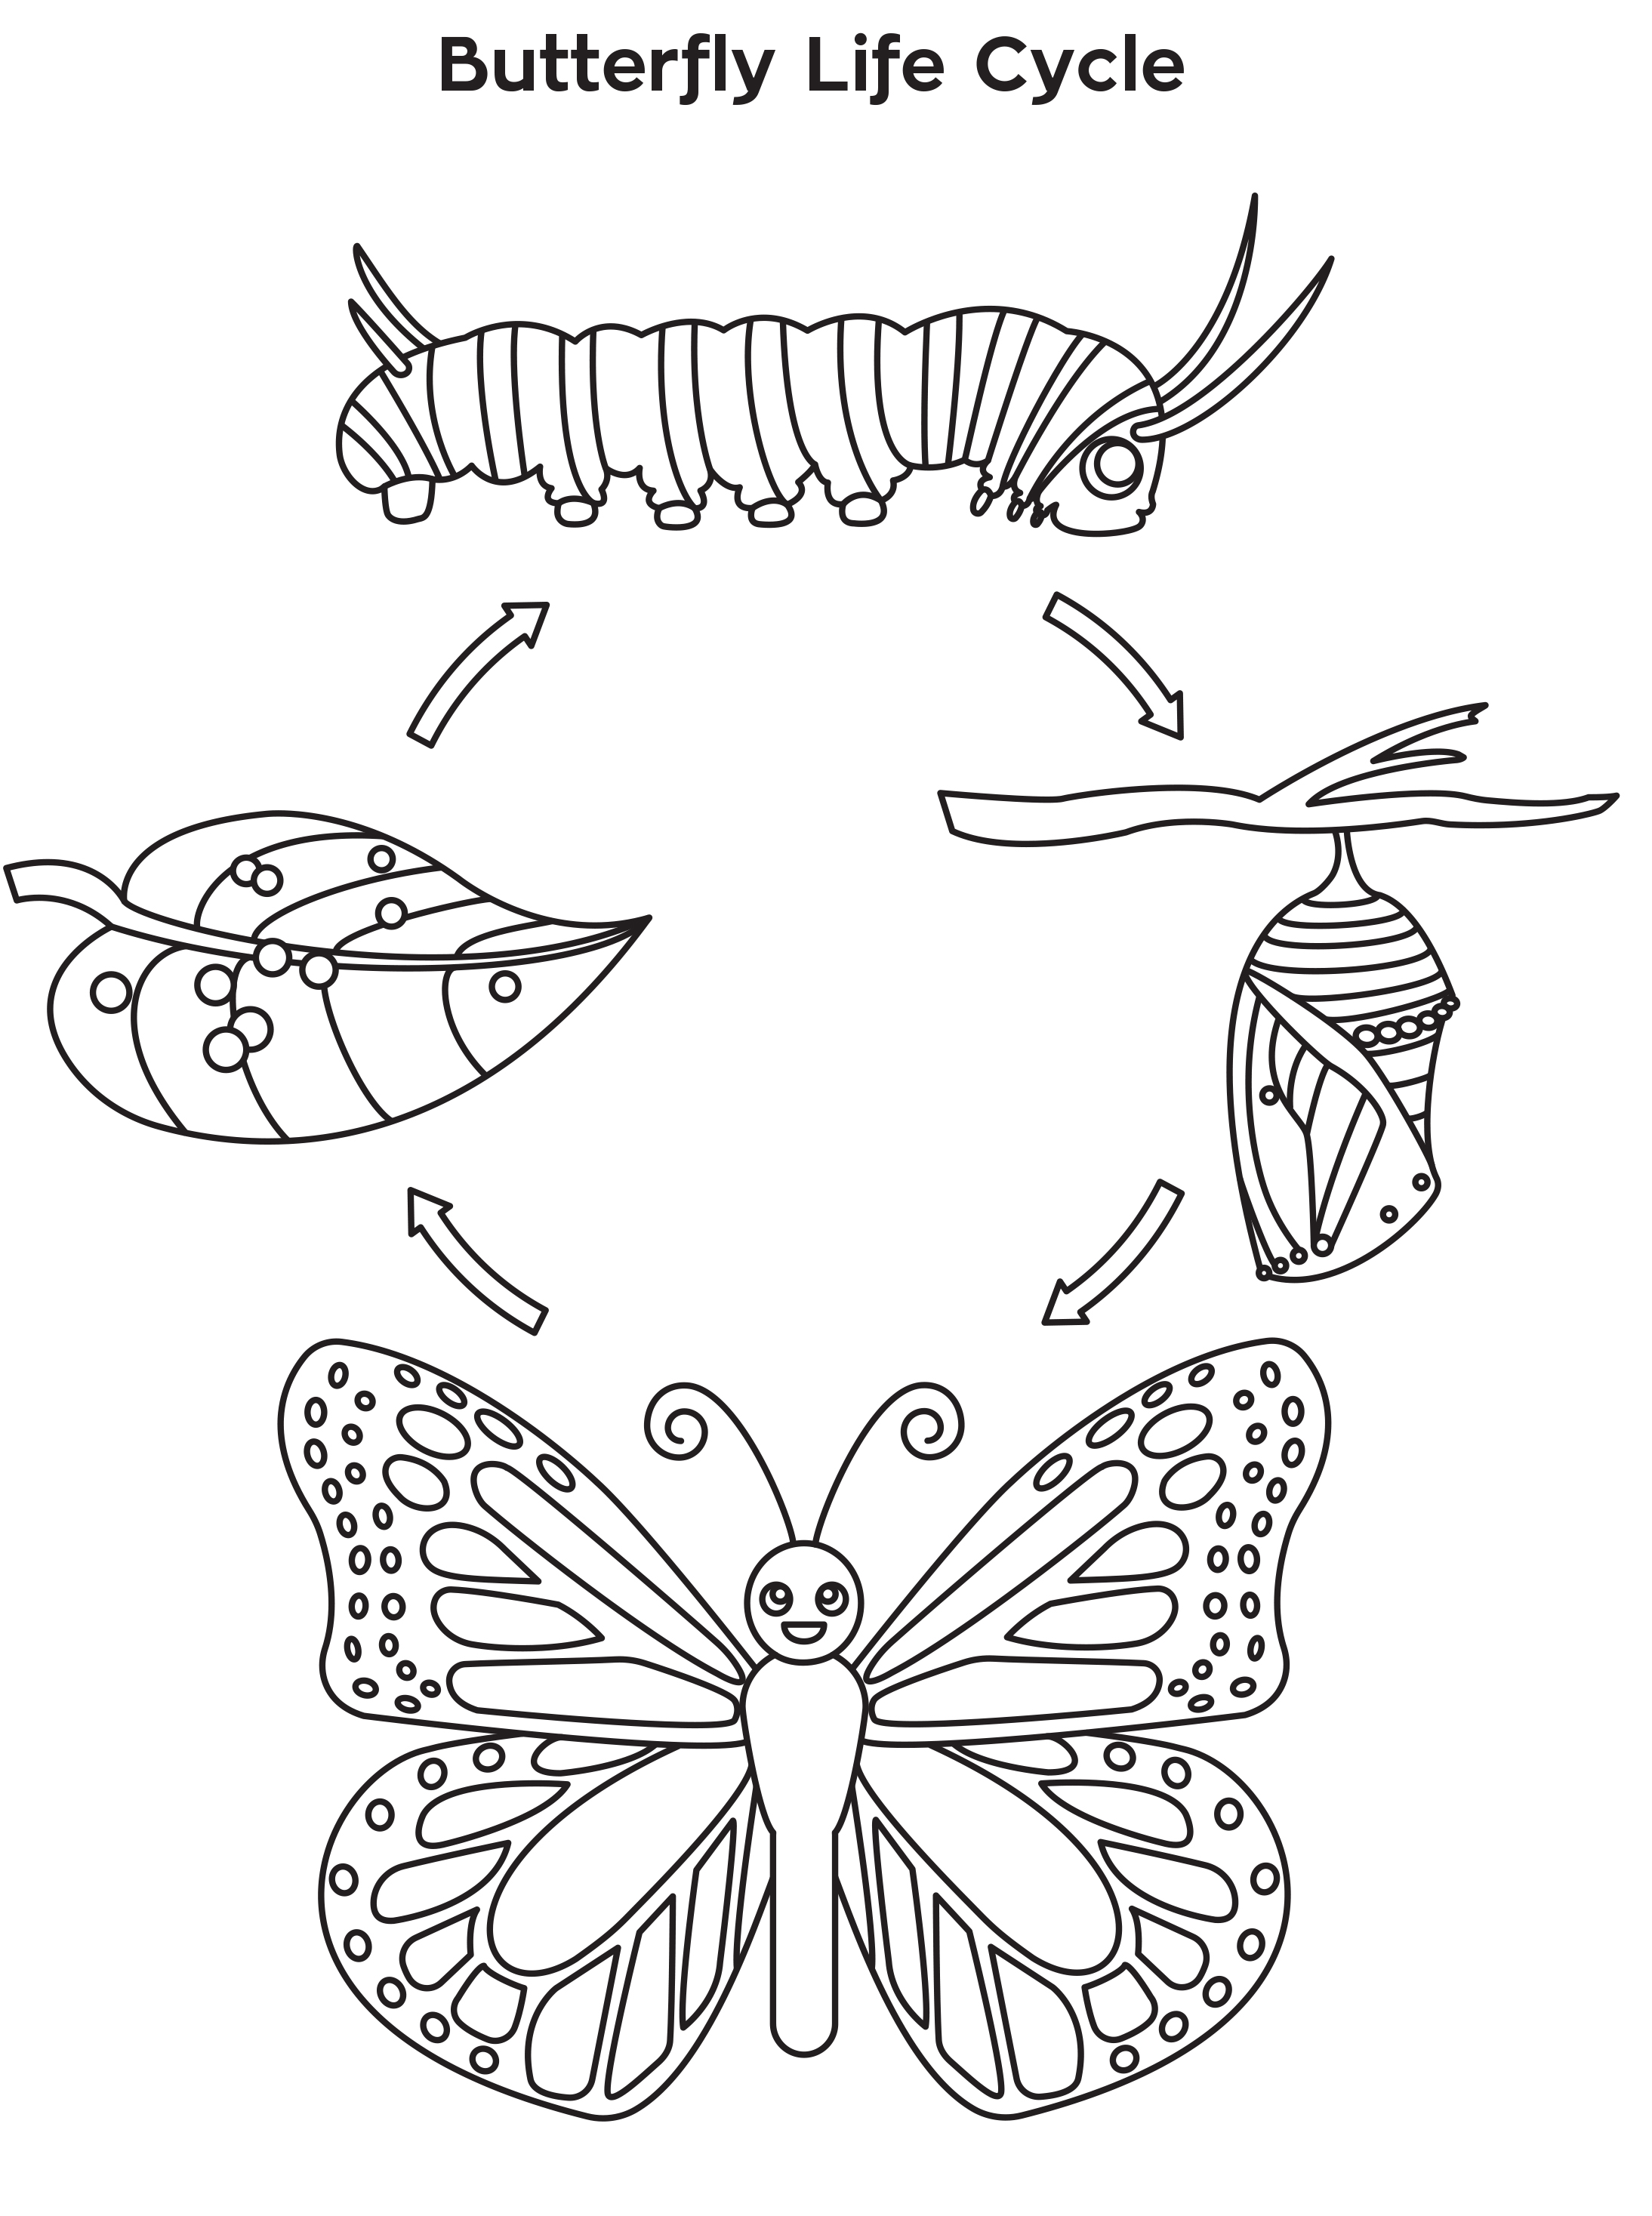 butterfly-life-cycle-drawing-at-getdrawings-free-download